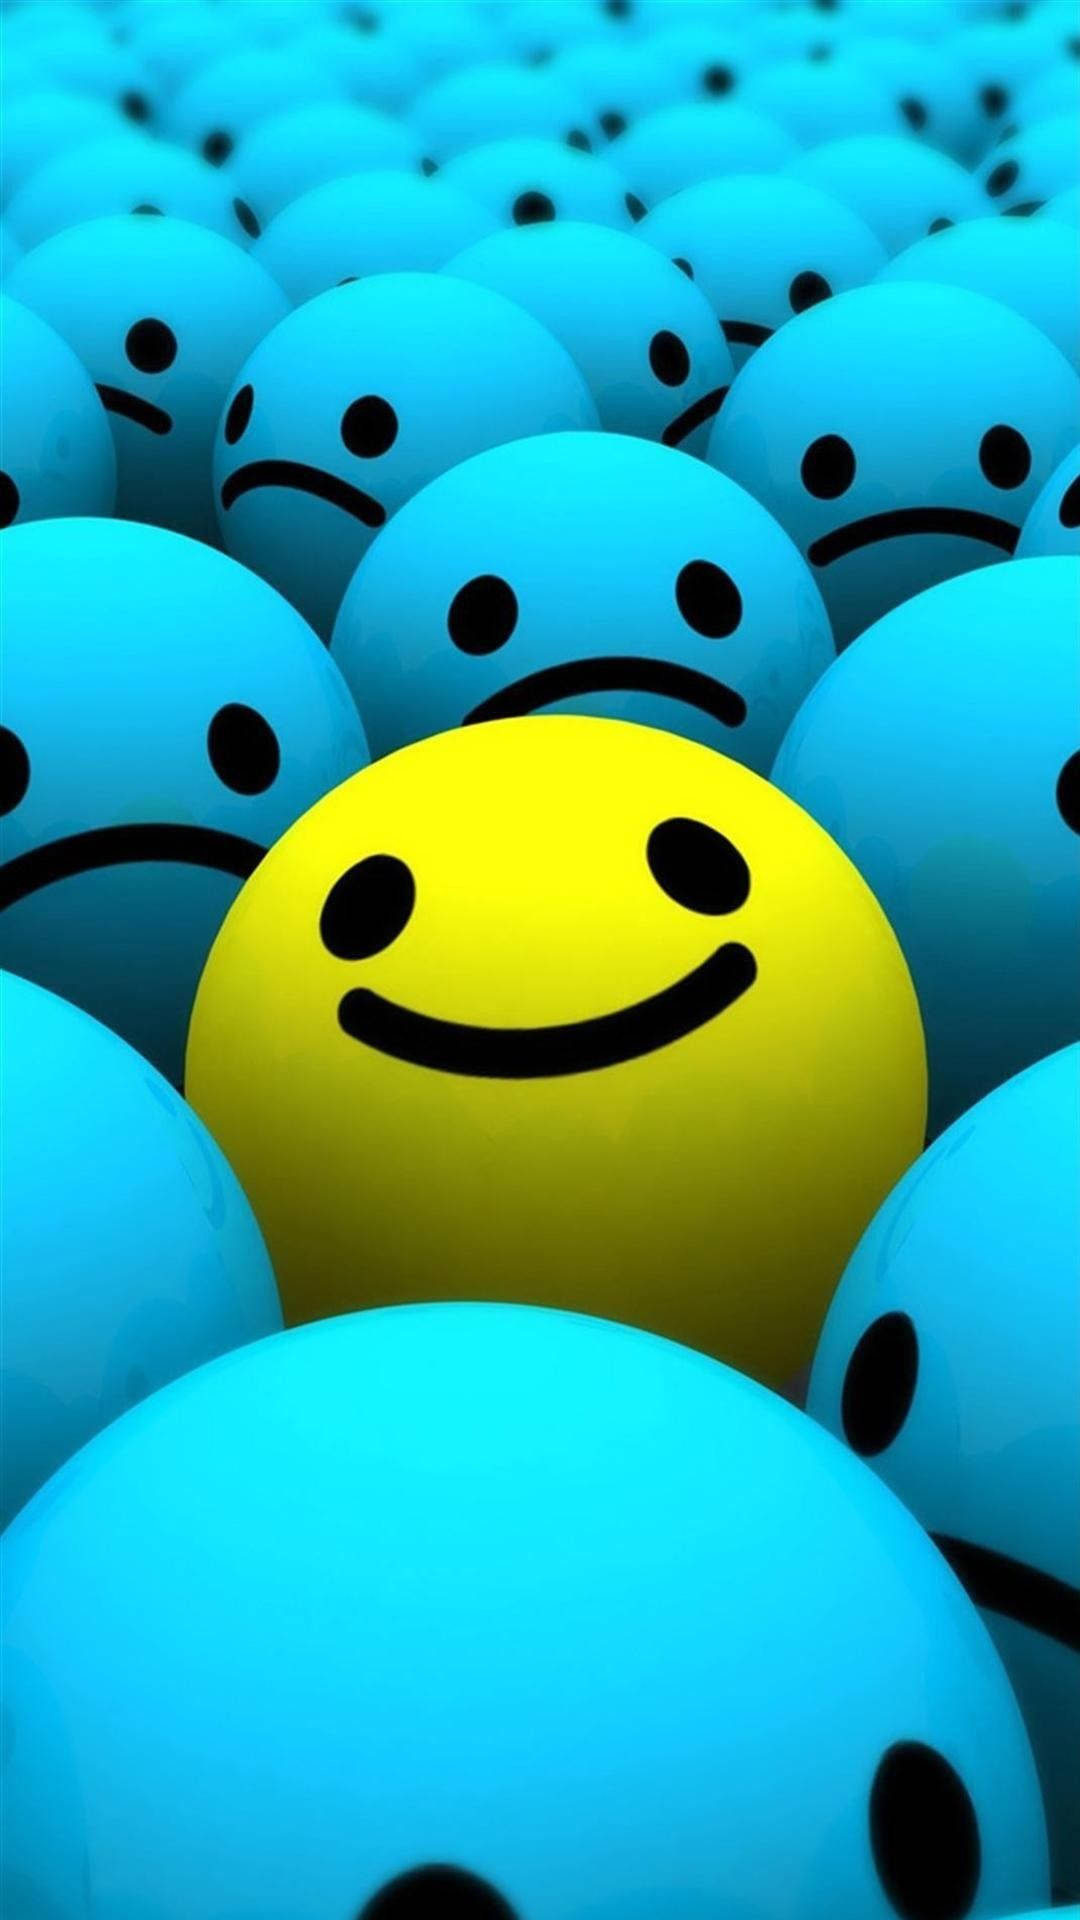 Smiley Ball With Blue Sad Balls Background